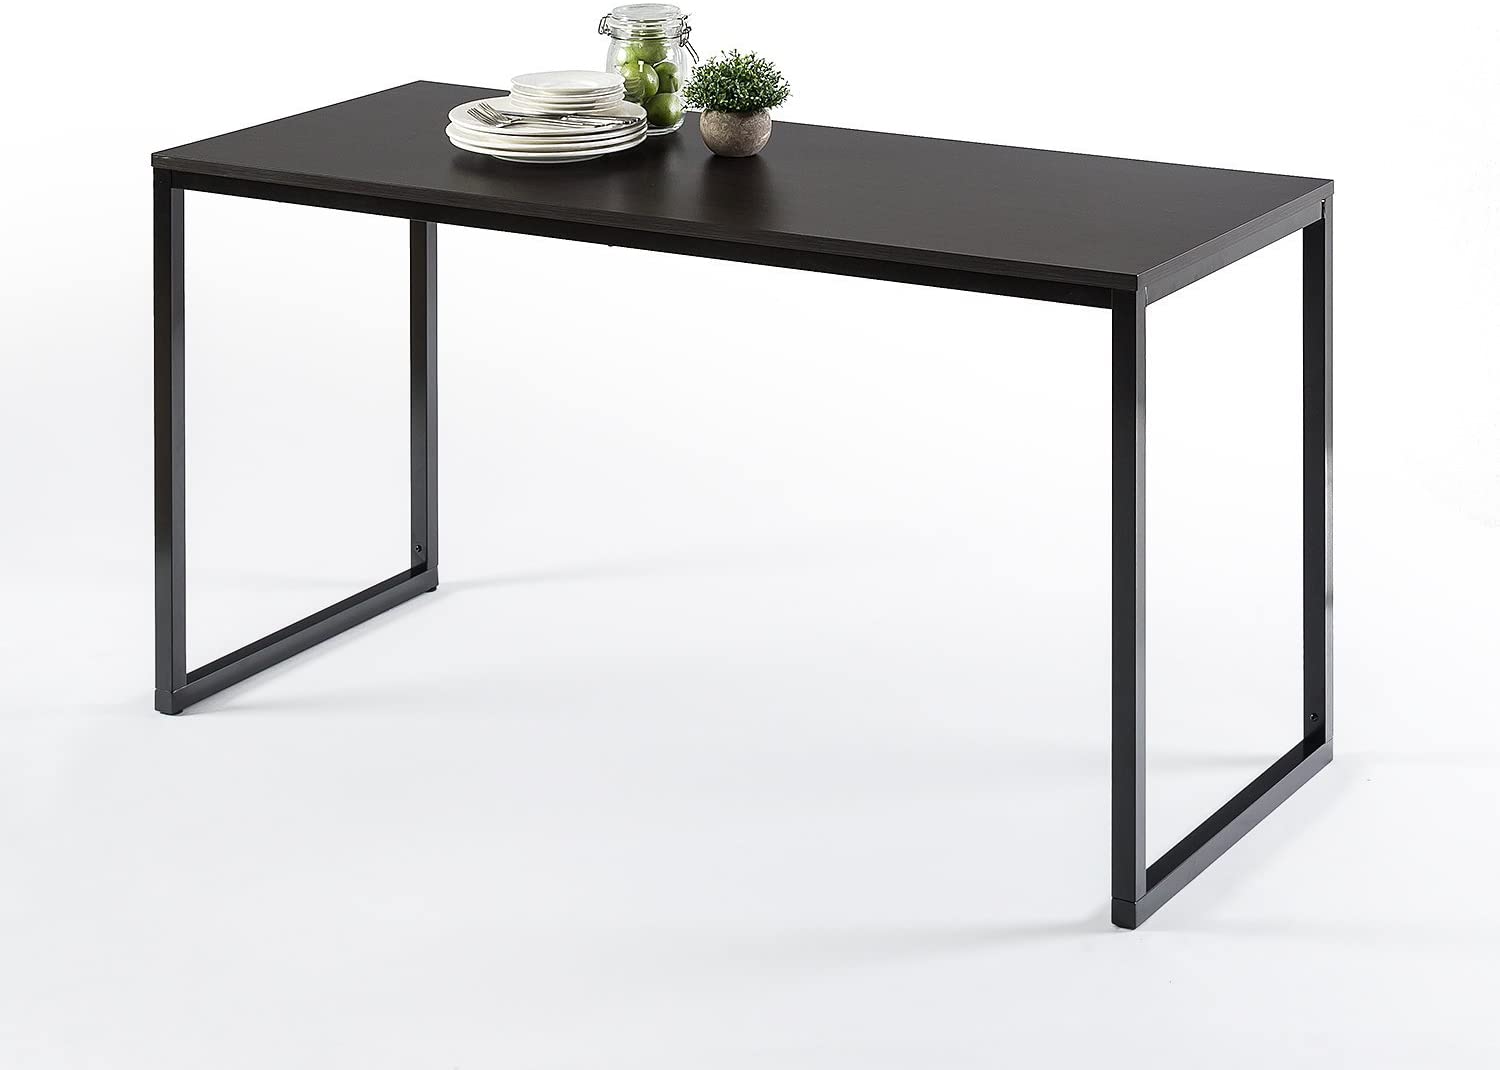 Zinus Jennifer Modern Studio Collection Soho Rectangular Dining Table / Table Only / Office Desk / Computer Table, Espresso